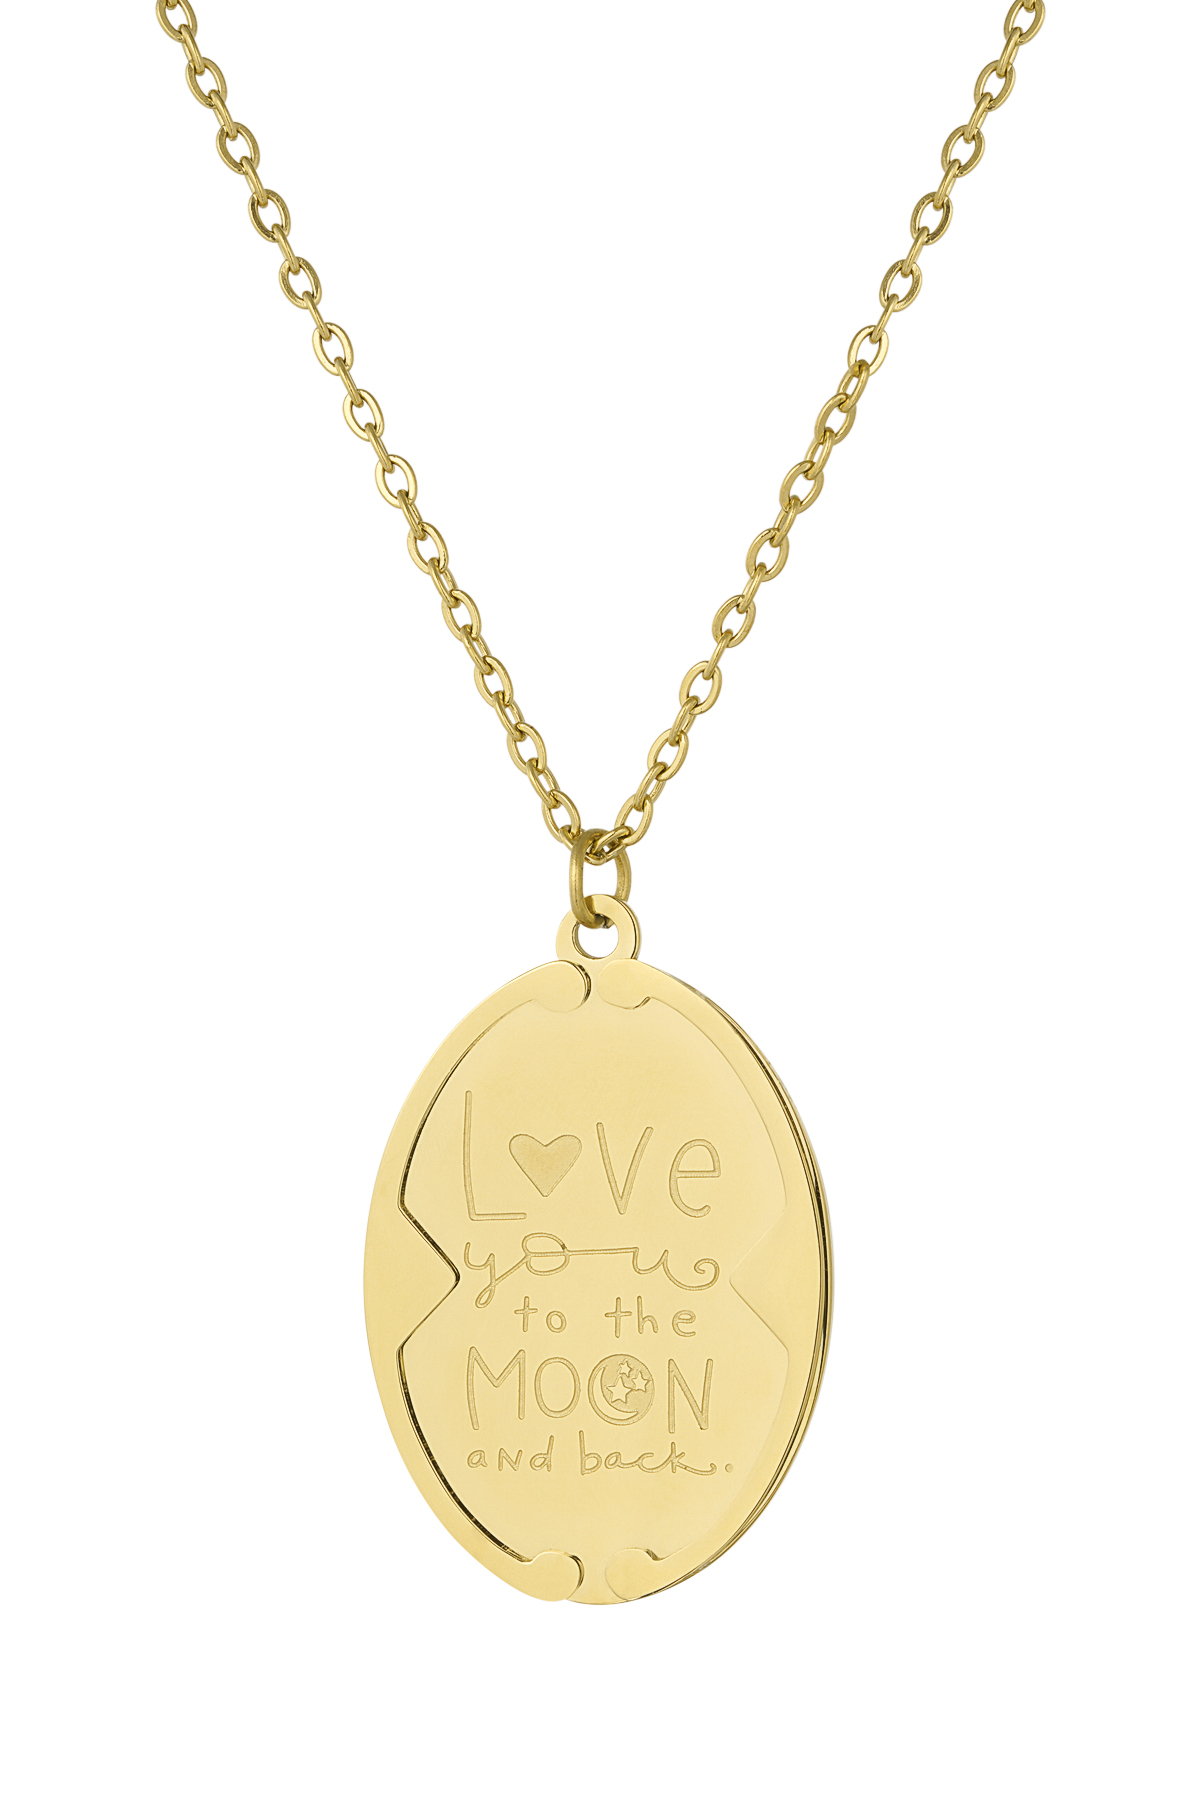 Love you to the moon and back necklace - gold  Picture4